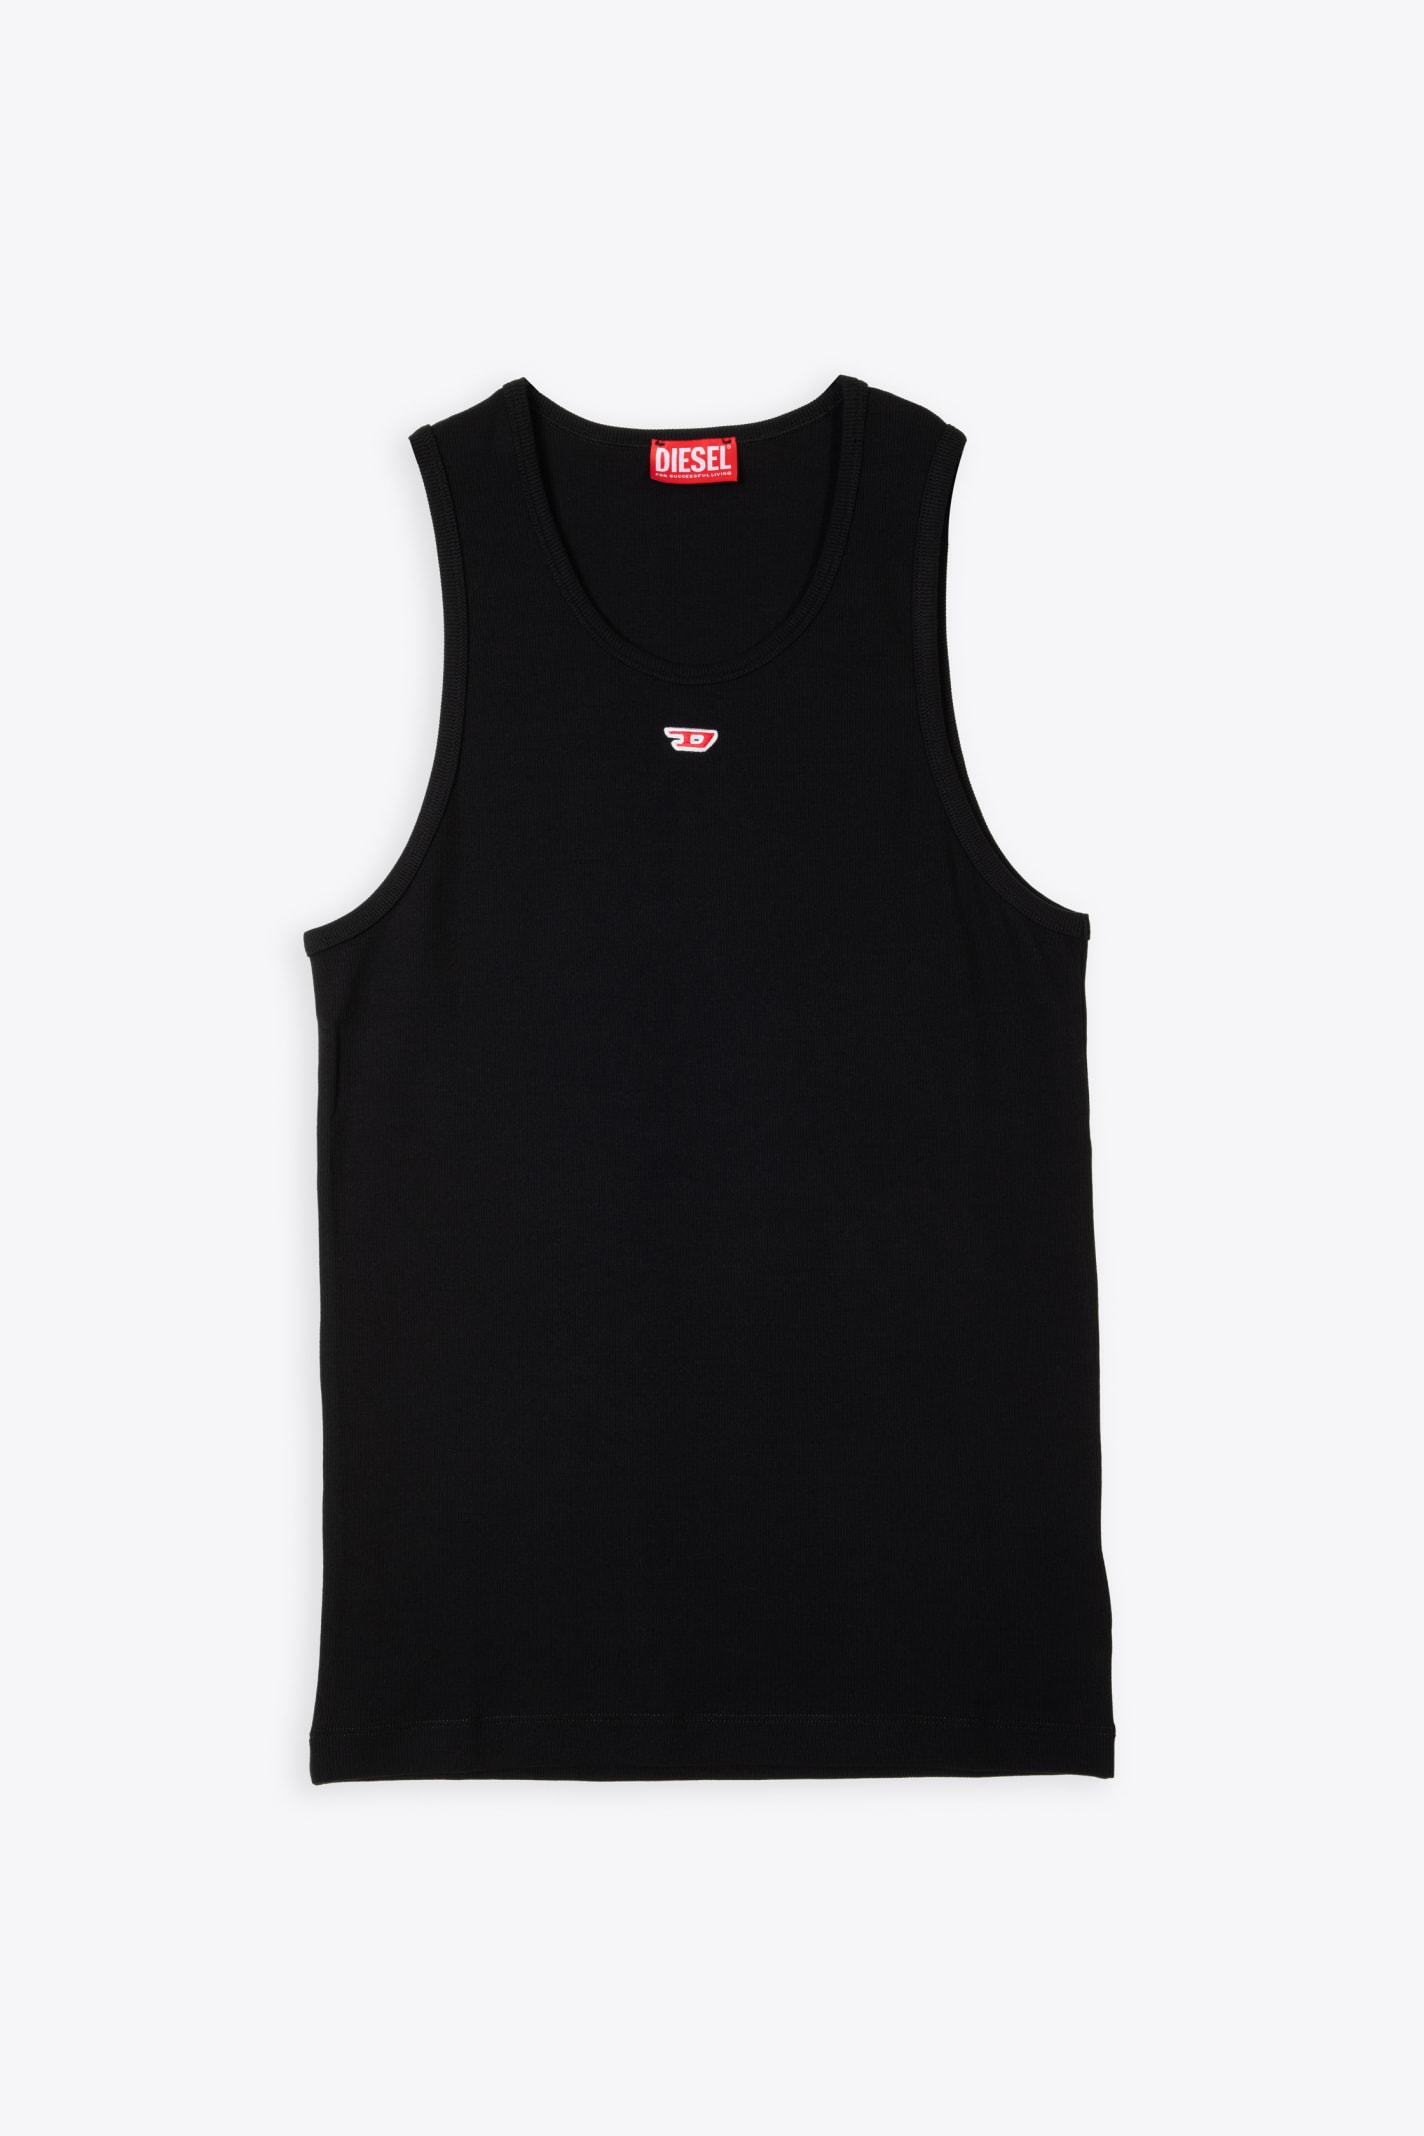 Diesel T-lifty-d Top Black ribbed cotton tank top - T Lifty d